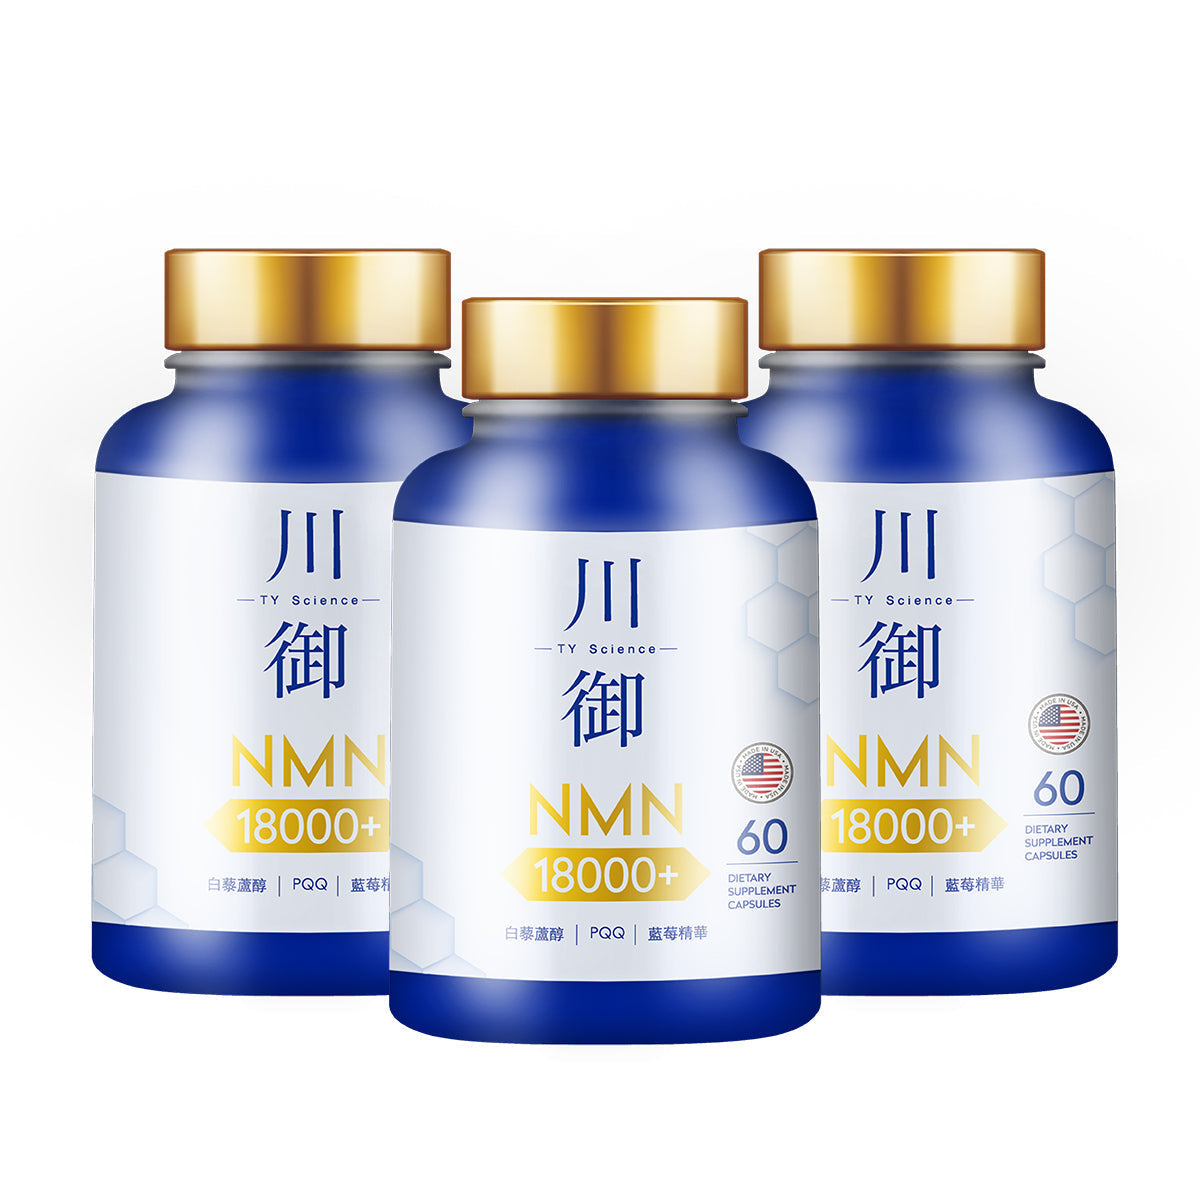 Sichuanyu enhanced version of NMN allows you to travel through time and delay aging. Produced in a GMP factory in the United States (upgraded version) recommended by Fan Yimin